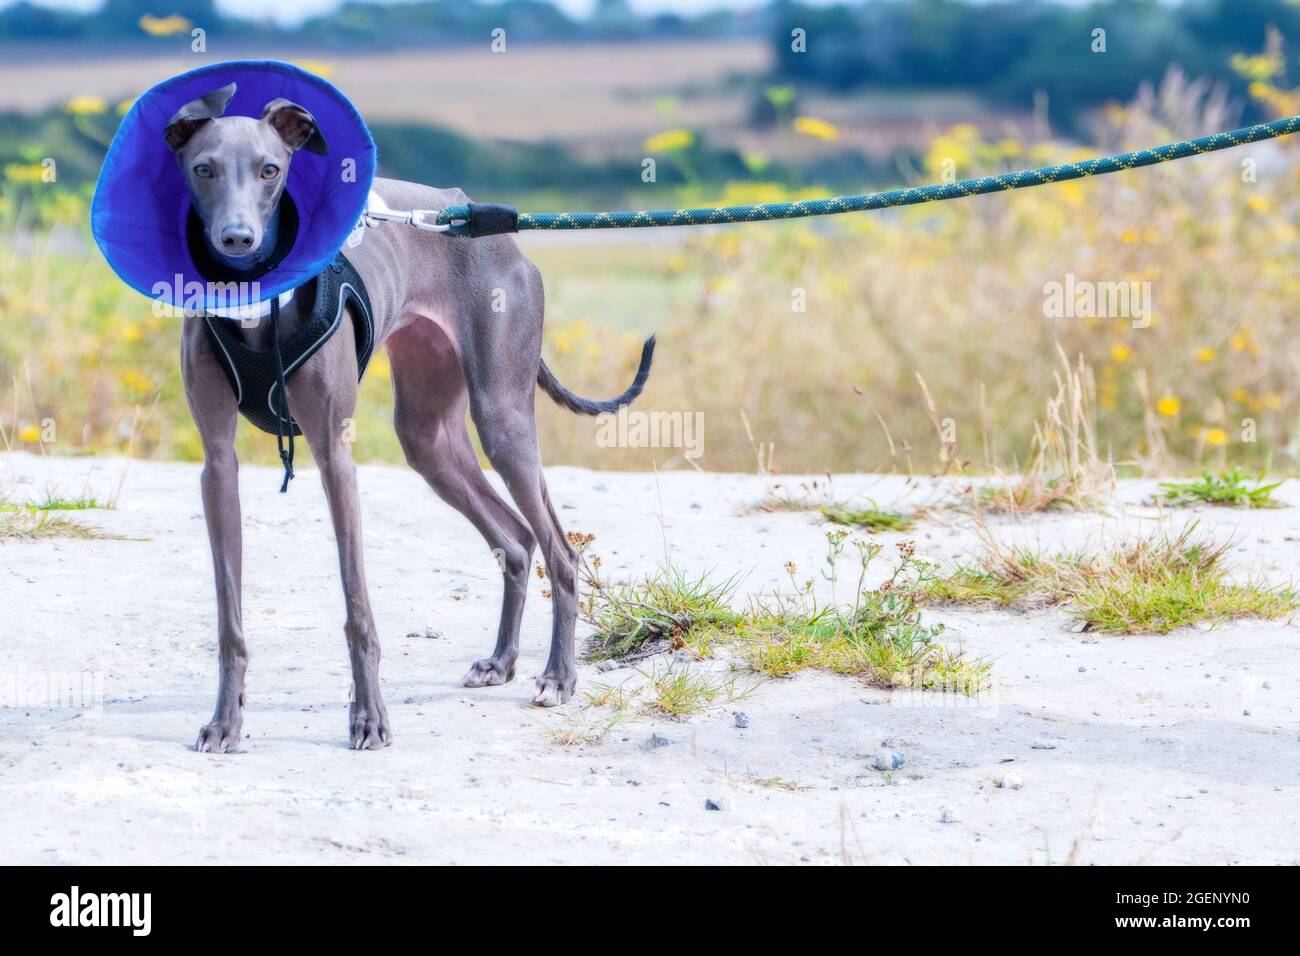 IItalian Greyhound puppy with a vets cone collar on recovering from an operation to her kneck. Stock Photo